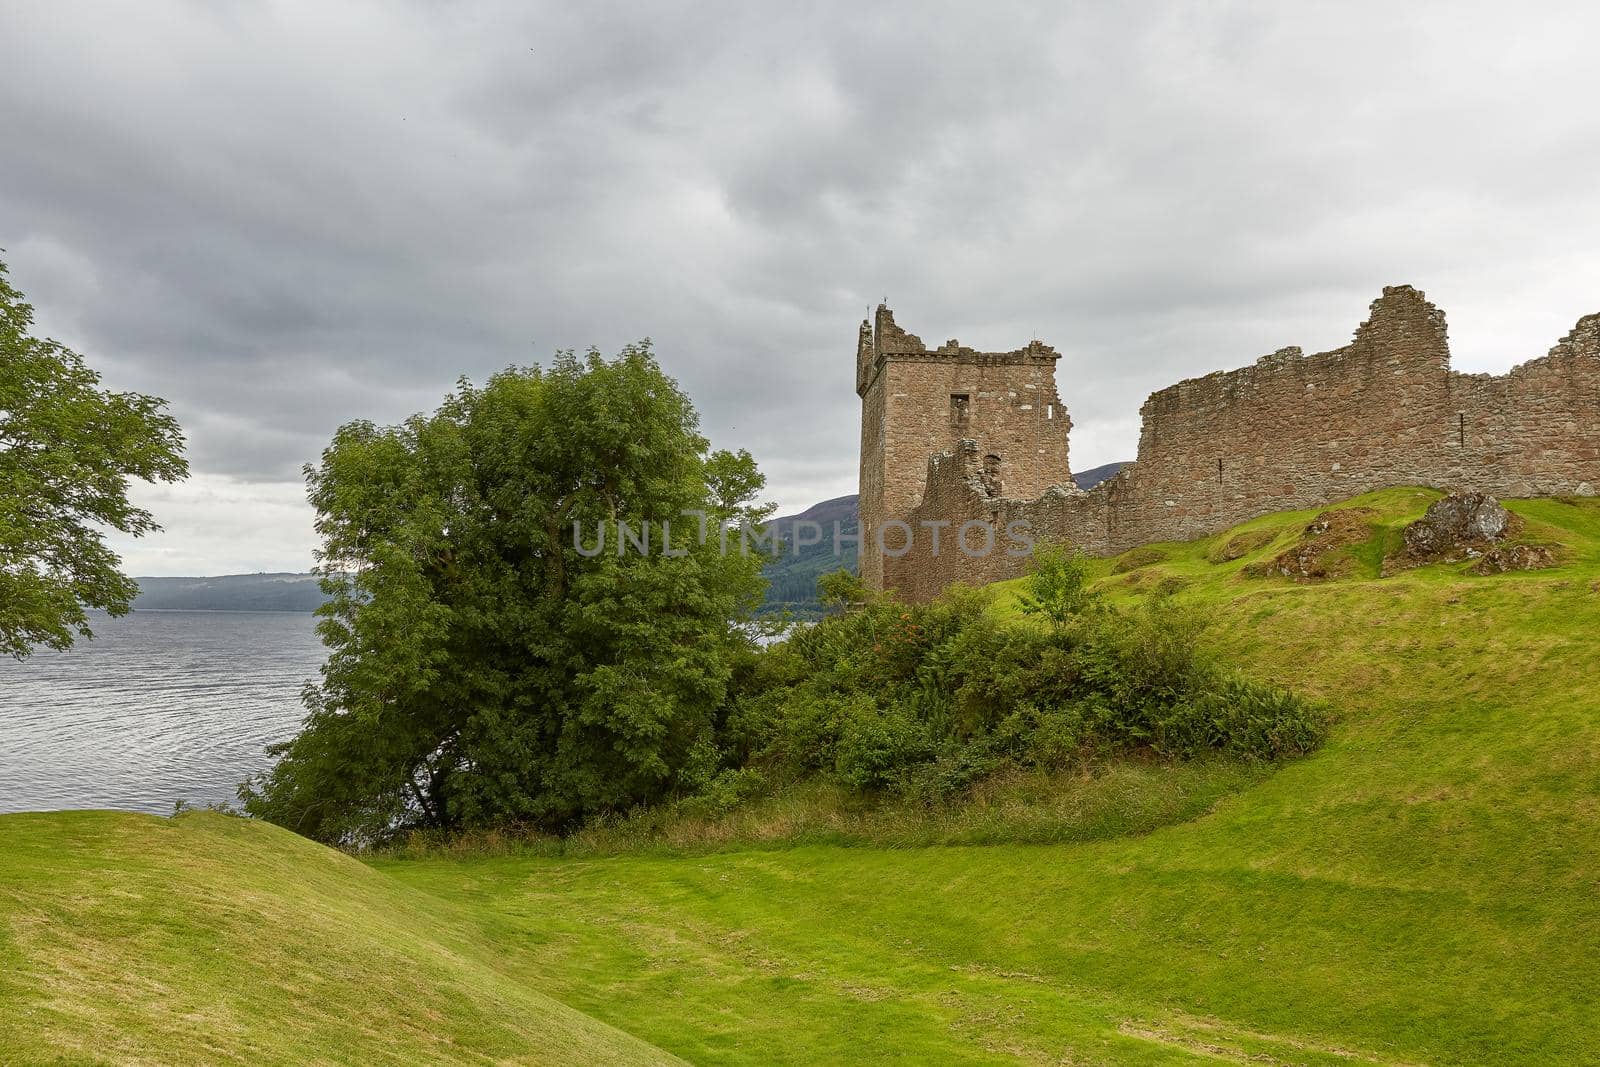 Urquhart Castle on the Shore of Loch Ness, Scotland